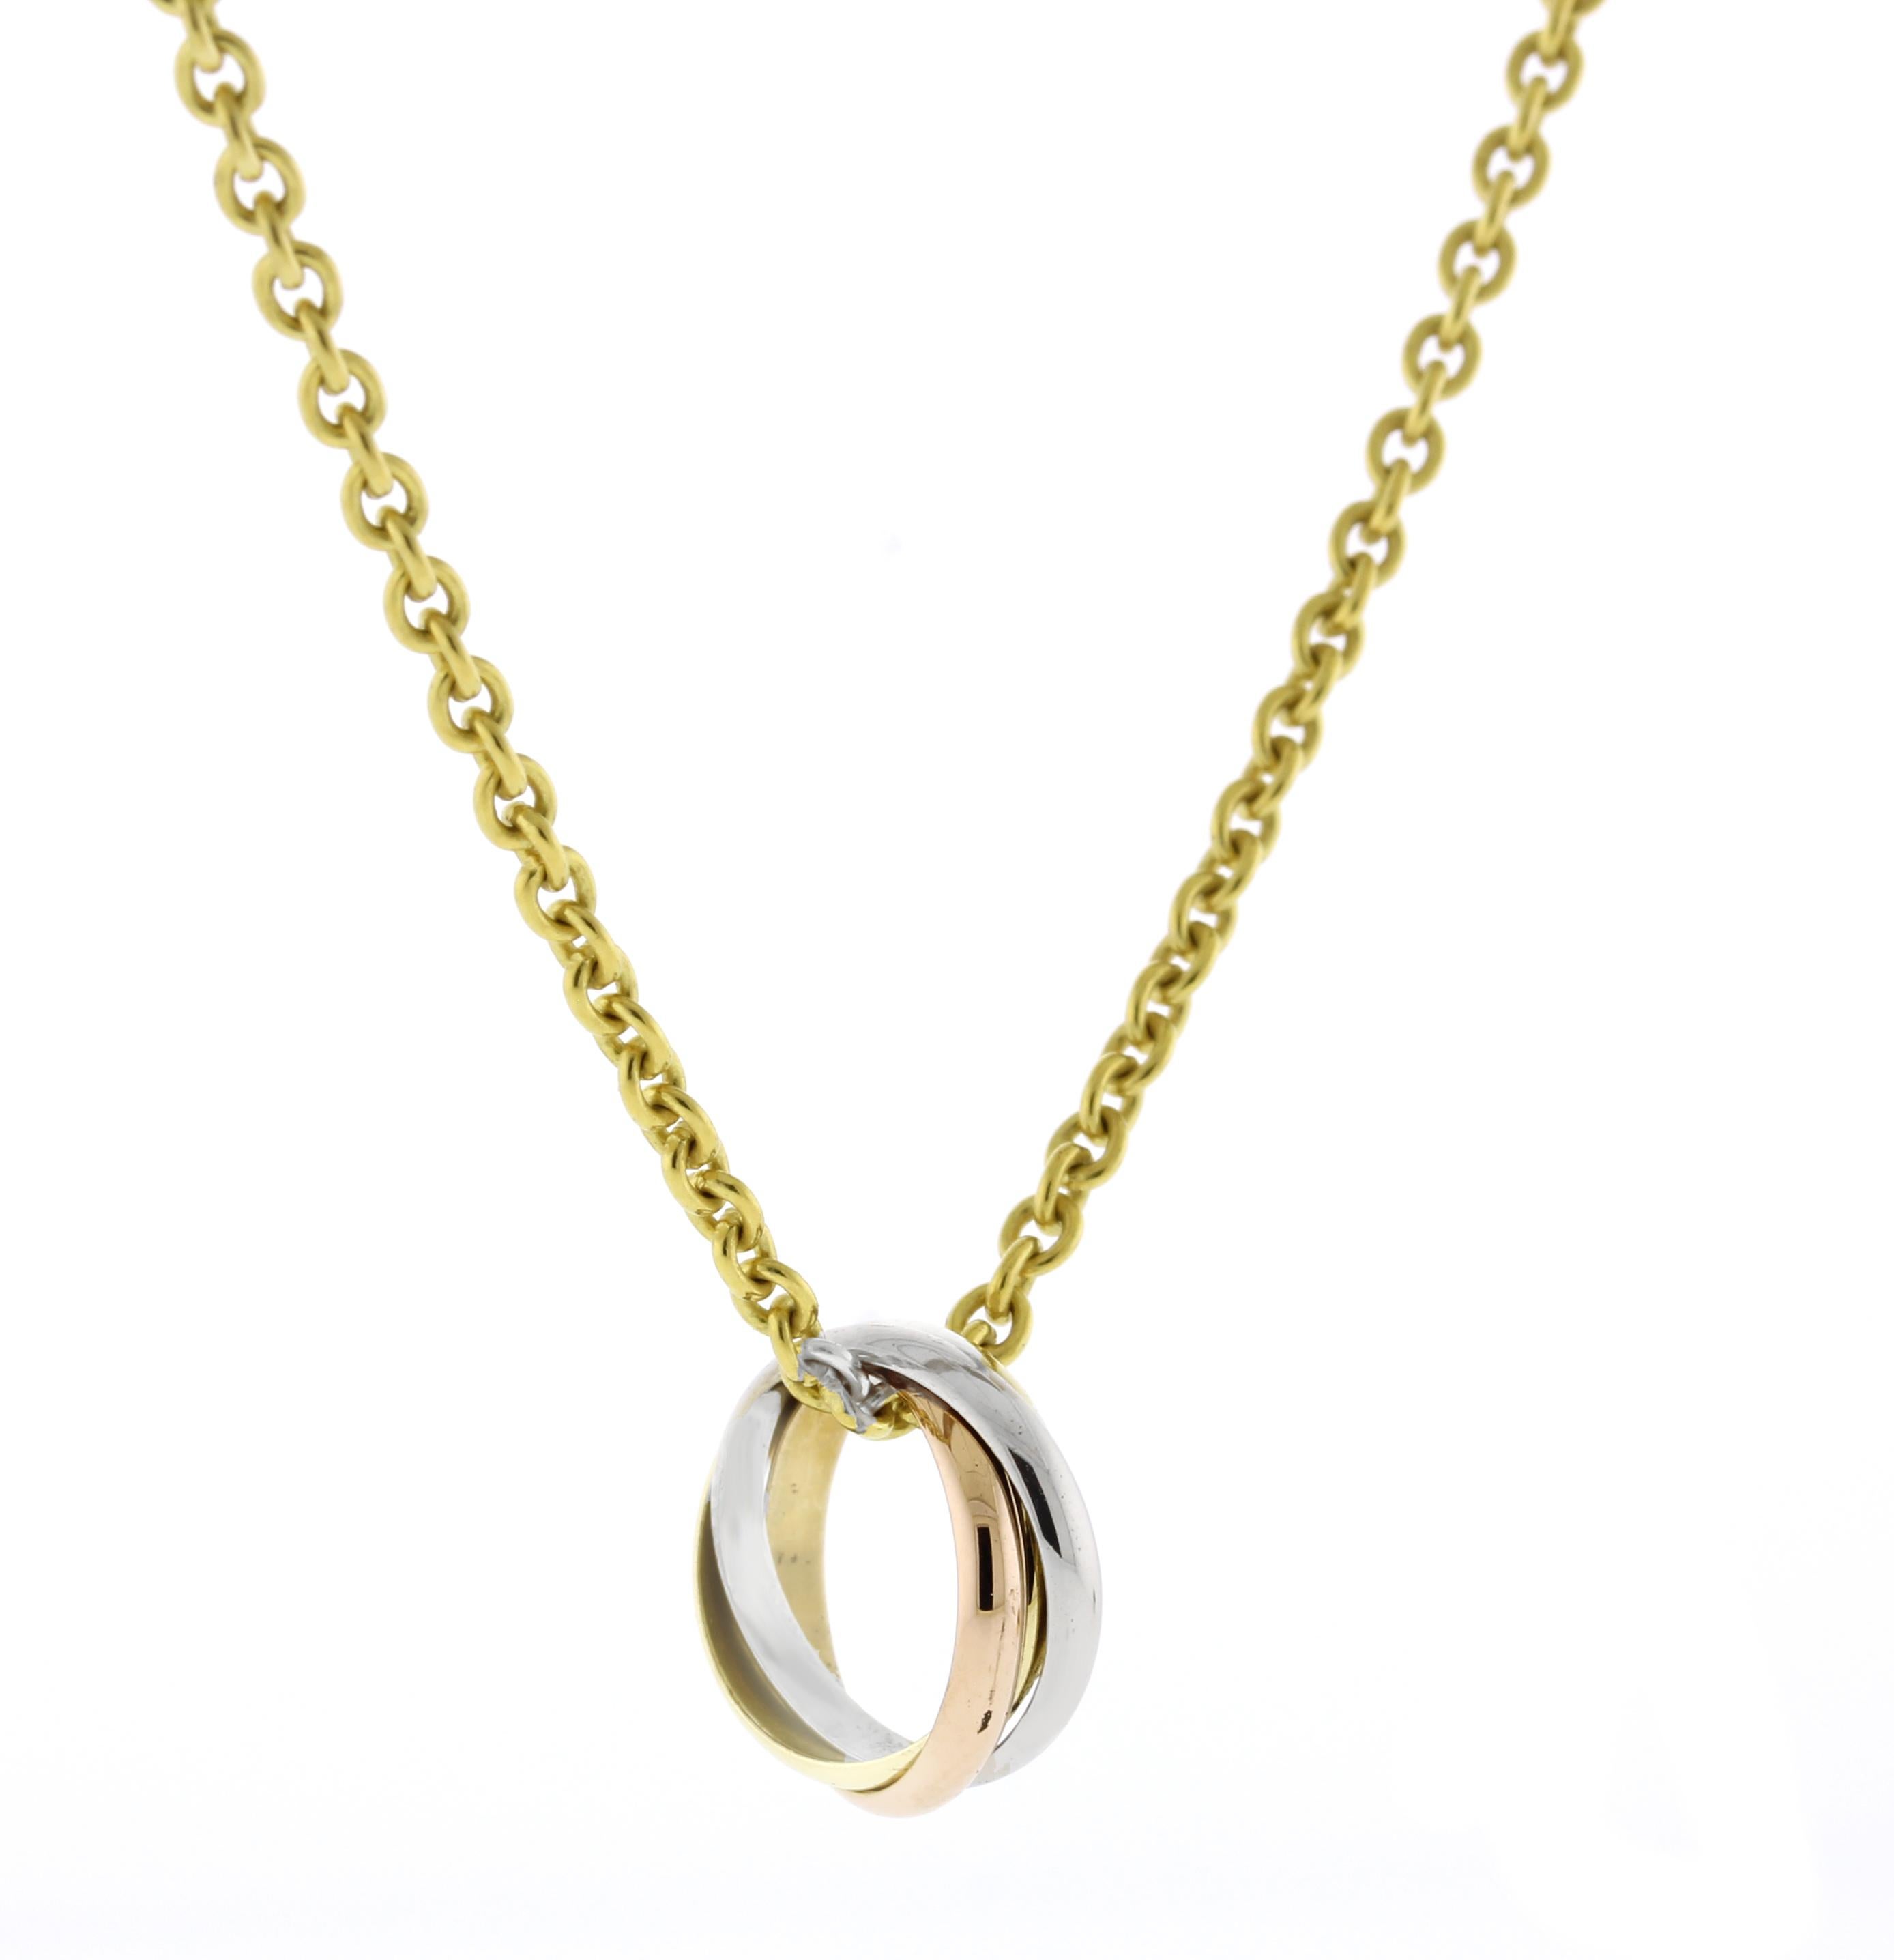 From Cartier's trinity collection, a trinity rolling ring pendant necklace.  Three bands. Three colors. Pink gold, yellow gold and white gold, intertwined in a display of mystery and harmony.  
♦ Designer: Cartier
♦ Metal: 18 karat
♦ Late 20th